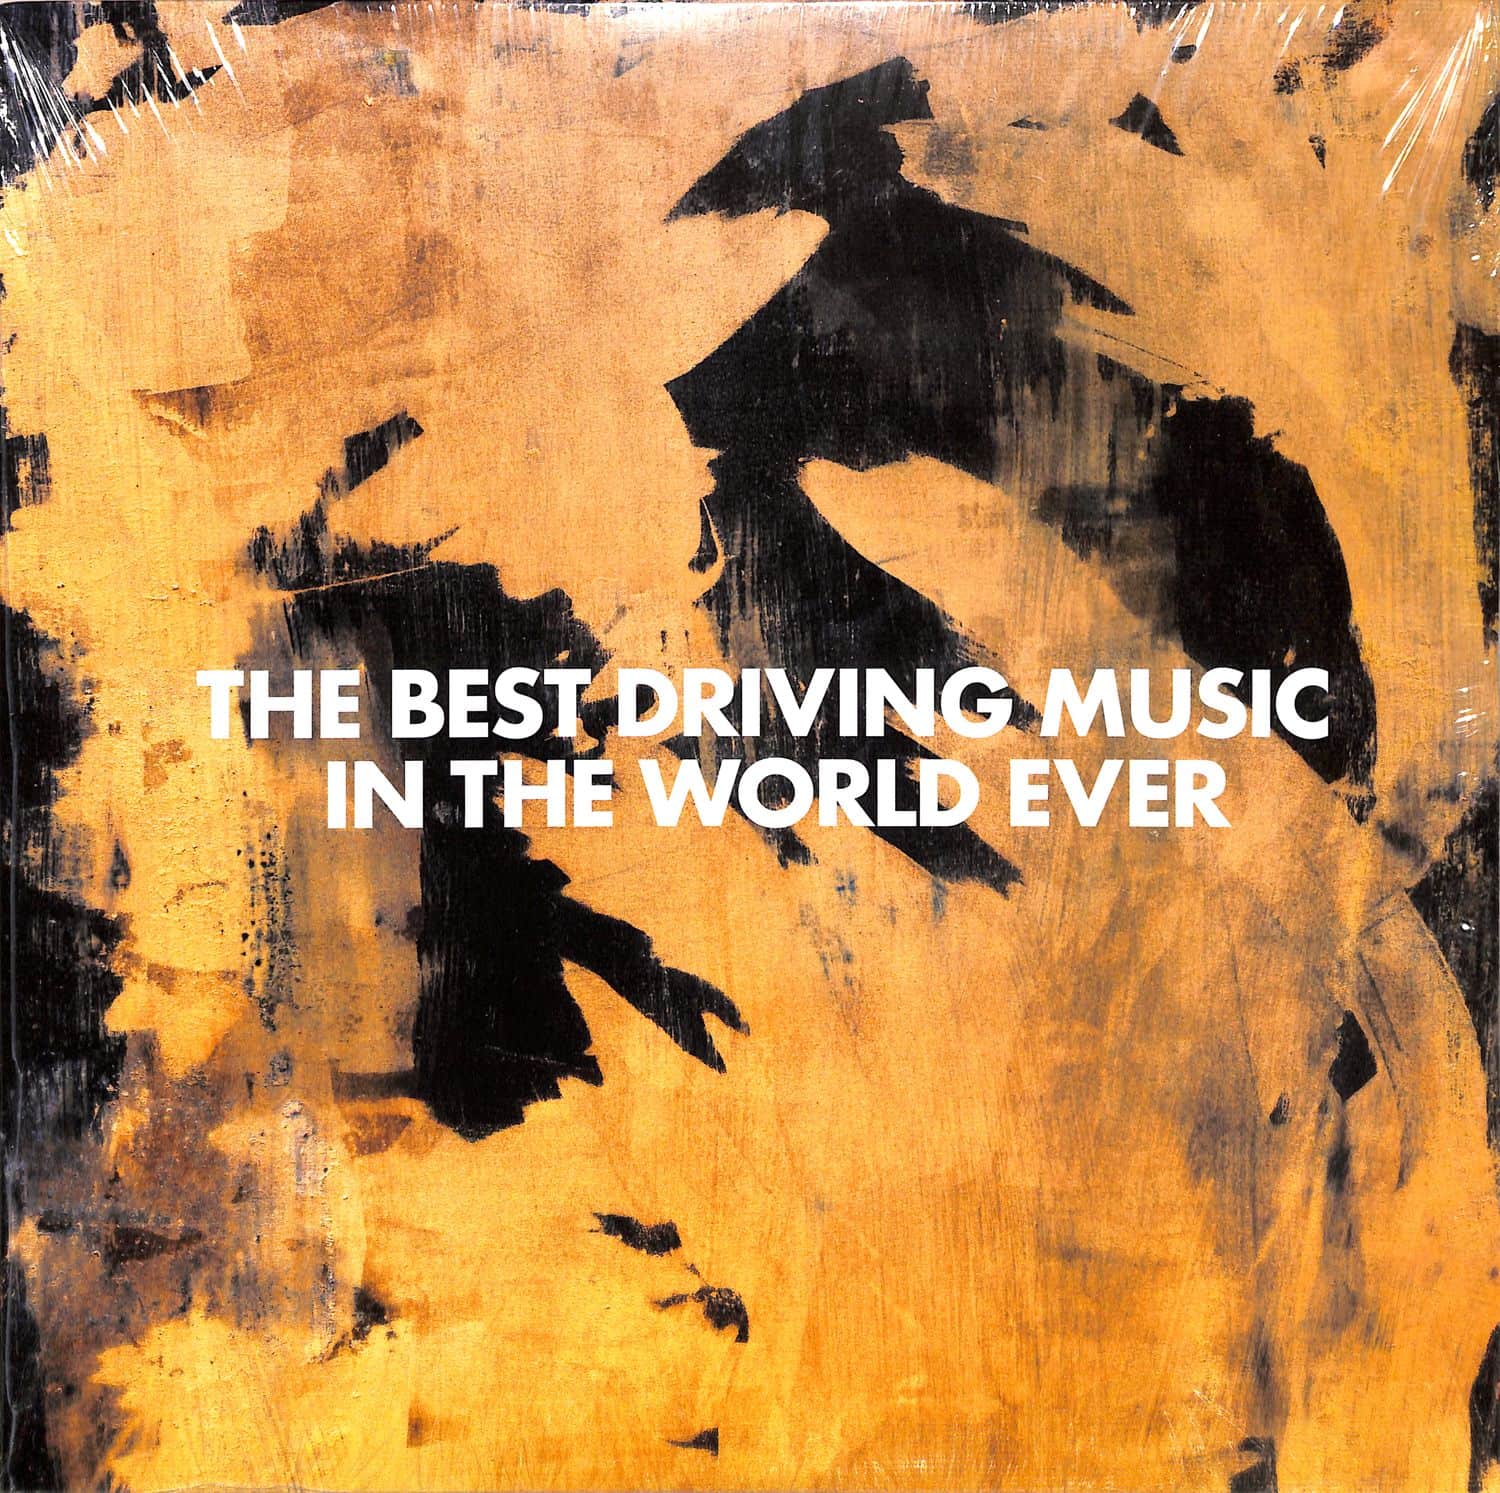 Sean Curtis Patrick - THE BEST DRIVING MUSIC IN THE WORLD EVER 